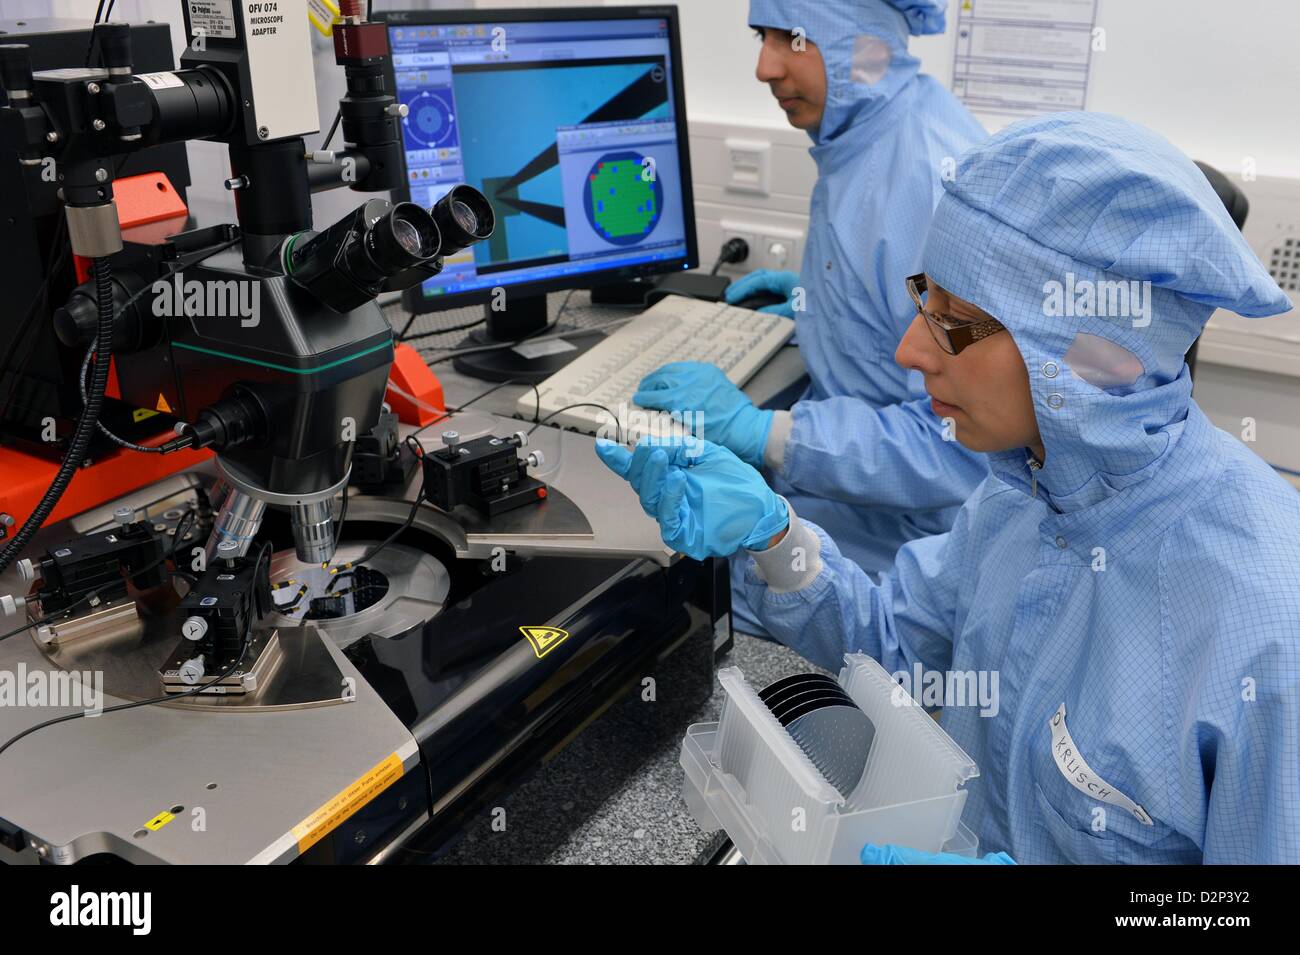 Employees Annett Krusch (R) and Dileep Dhakal put a 4-inch (100 mm) wafer into the wafer sample station at the Microtechnology  Laboratory of the Fraunhofer Institute for Electronic Nano Systems ENAS in Chemnitz, Germany, 04 December 2012. The researchers contribute to the German Federal Cluster of Excellence 'Merge Technologies for Multifunctional Lightweight Structures'. The German Federal Cluster of Excellence MERGE is a prime example for an interdisciplinary research project at the Chemnitz University of Technology, which will be officially launched on 30 January 2013. Photo: Hendrik Schmi Stock Photo